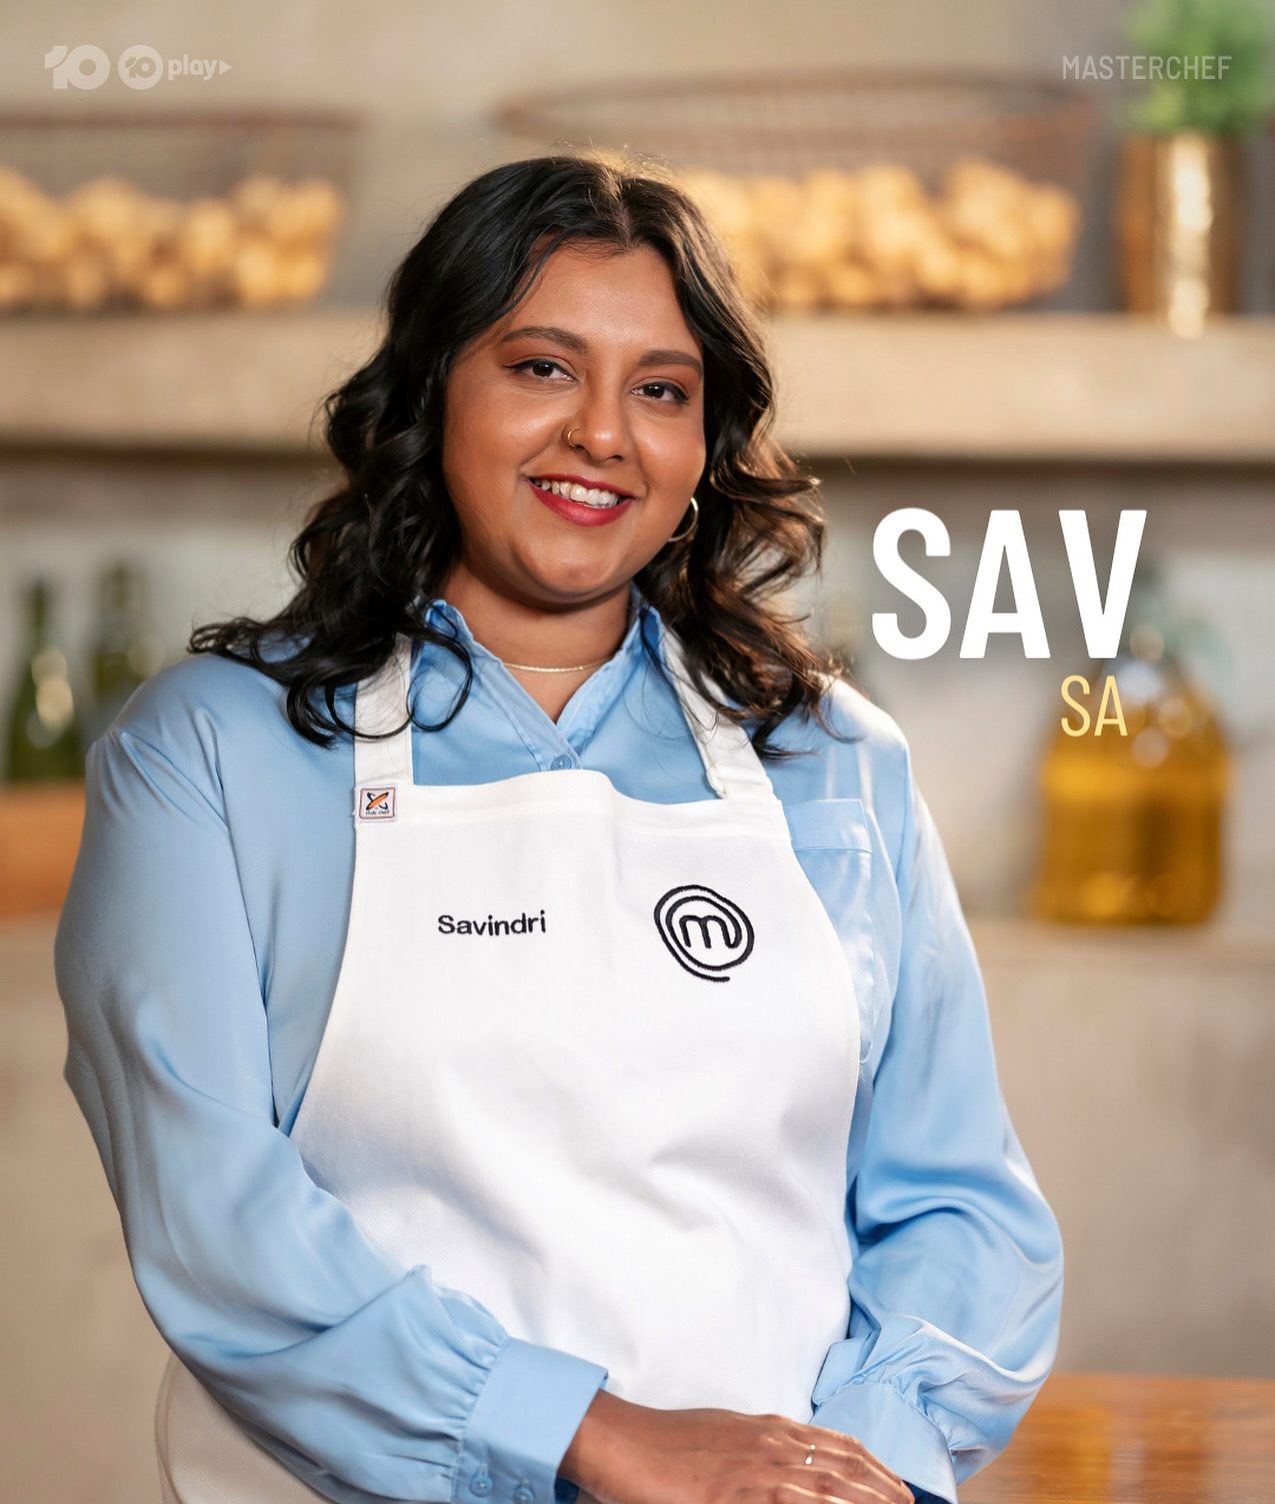 Sav's master chef journey is tribute to her late mom